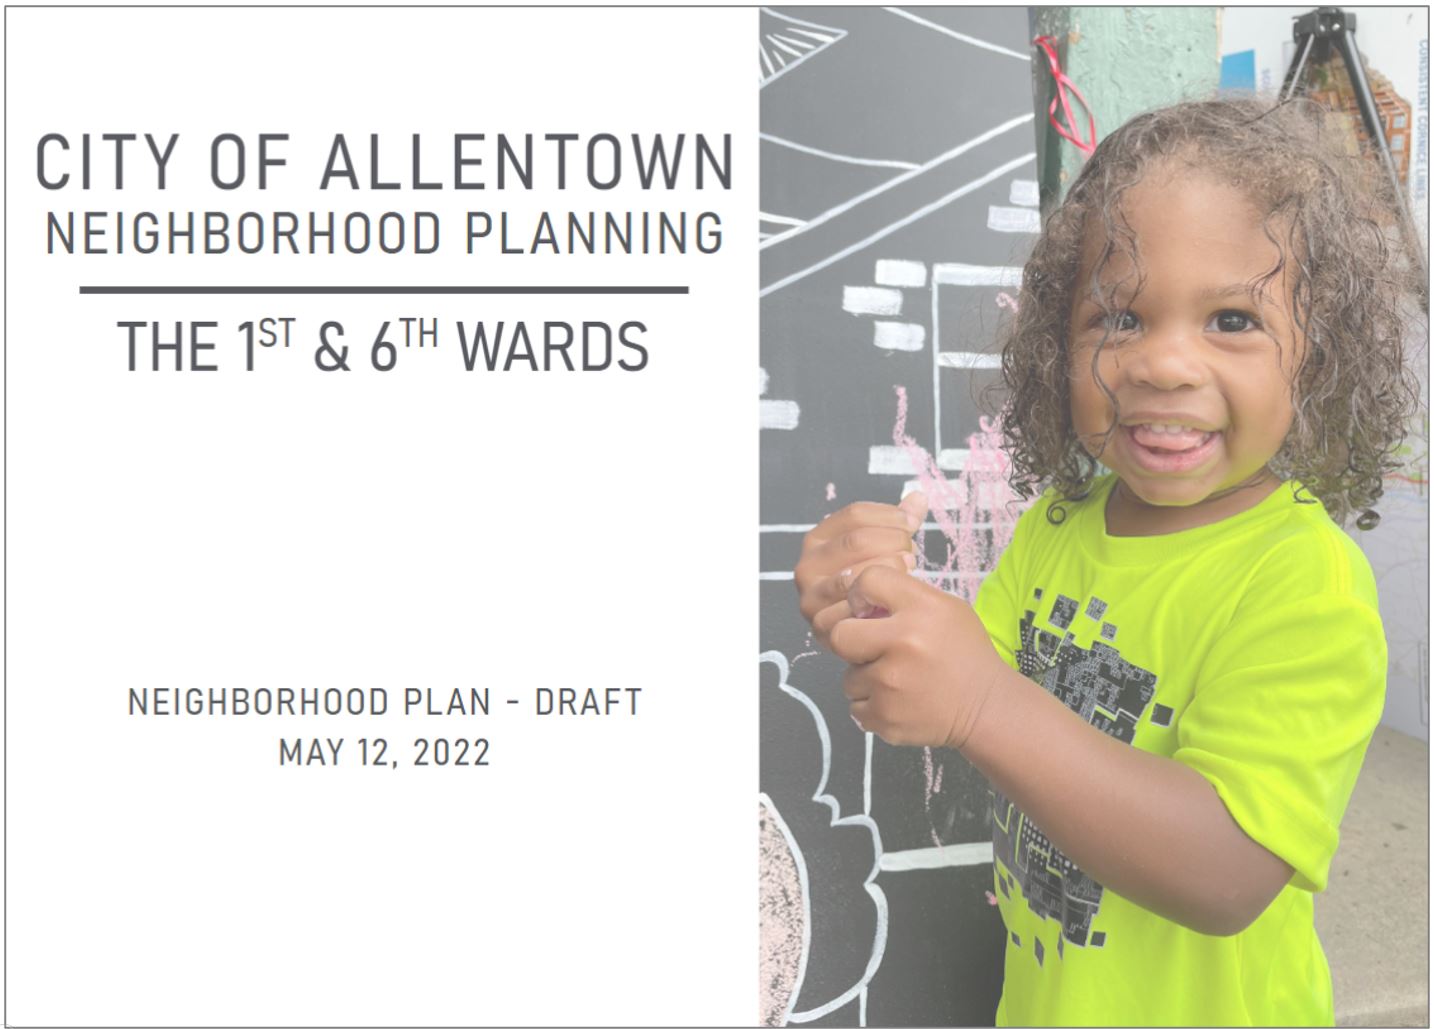 Neighborhood Plan Draft for the 1st and 6th Wards